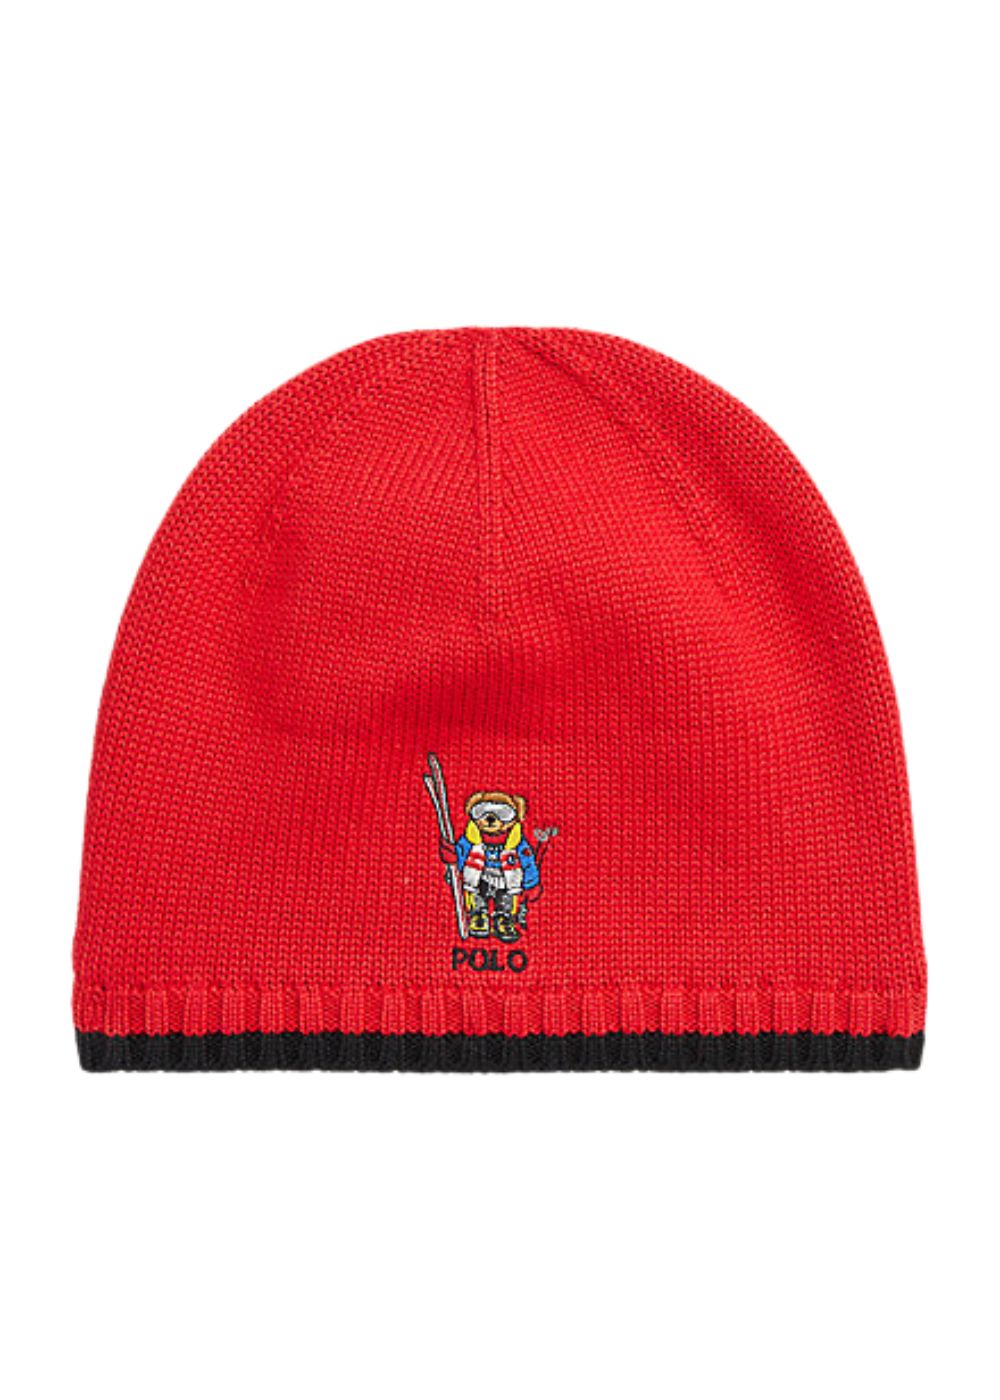 Featured image for “Polo Ralph Lauren Cappellino Polo Bear”